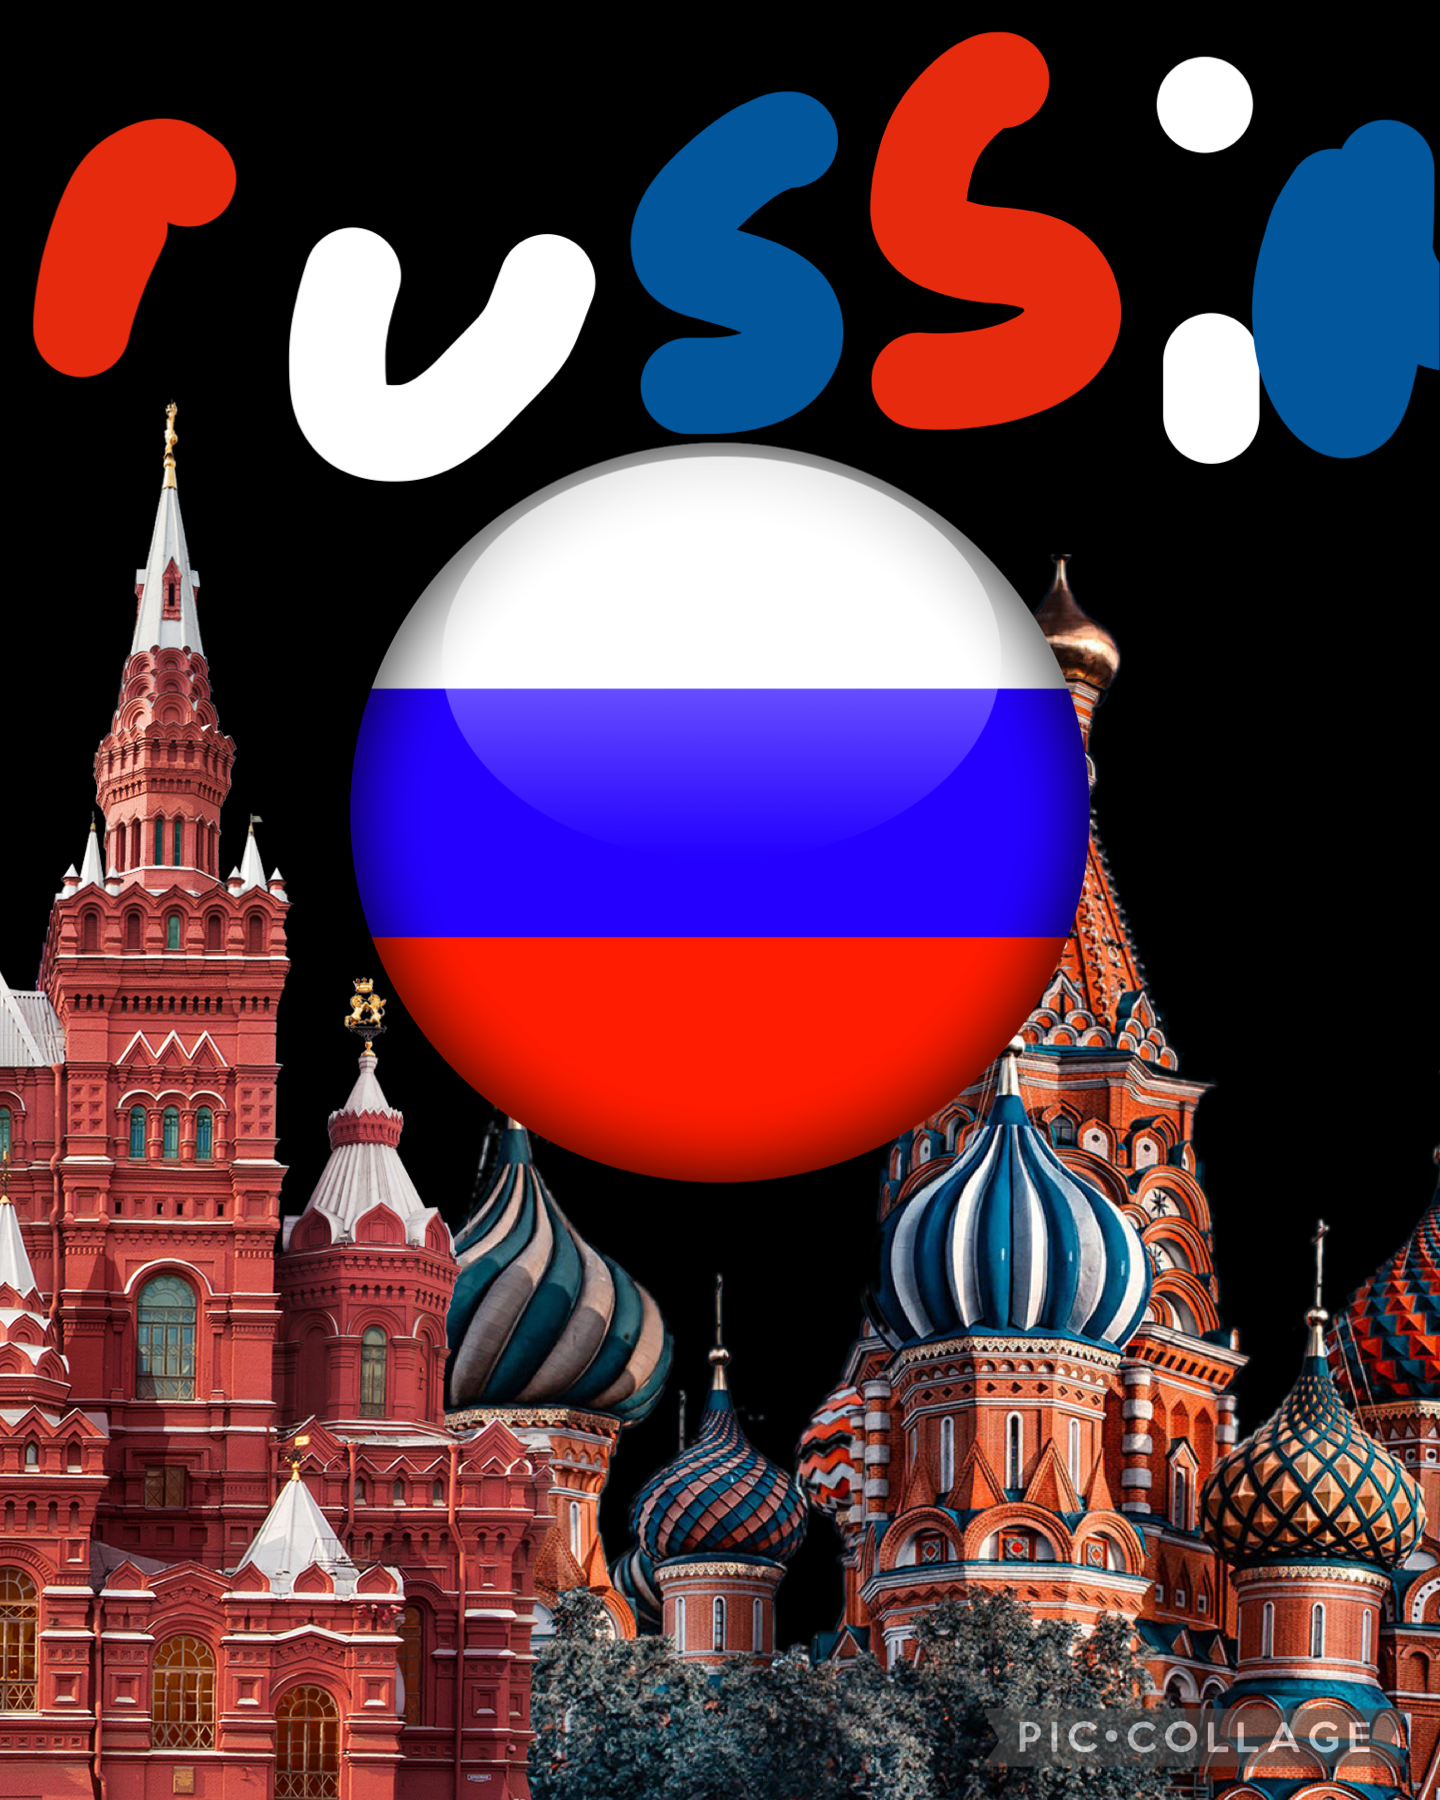 Posting random country’s until I get to 200 followers yay I think this will take a long time for me to get there! But I won’t force you too! Just pls if you are pls follow!!! 🇷🇺